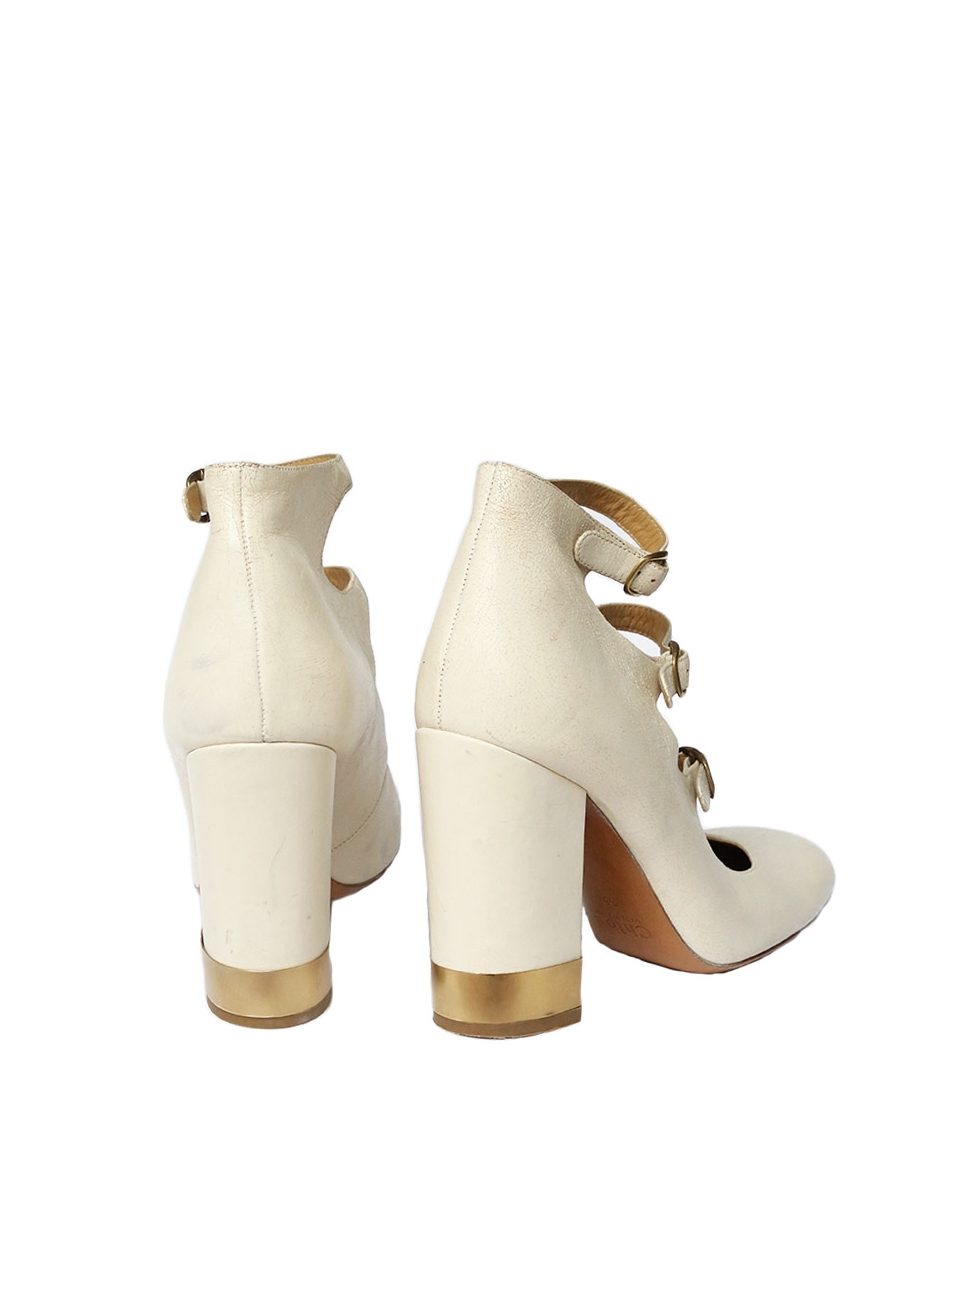 Boutique CHLOE Multi-strap with gold buckles ivory white distressed leather  pumps Retail price €600 Size 36